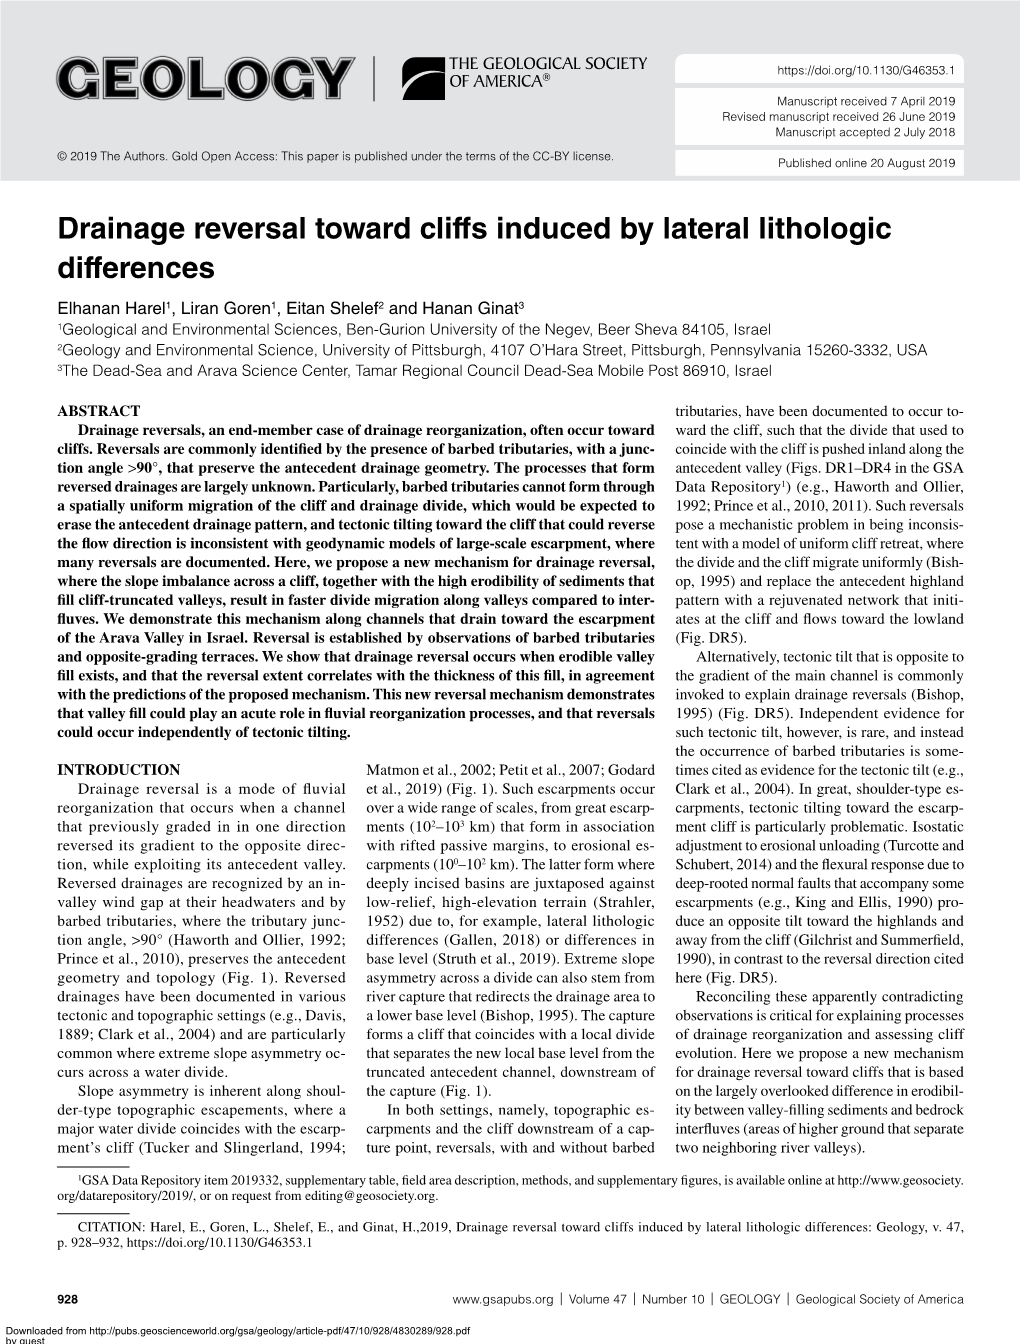 Drainage Reversal Toward Cliffs Induced by Lateral Lithologic